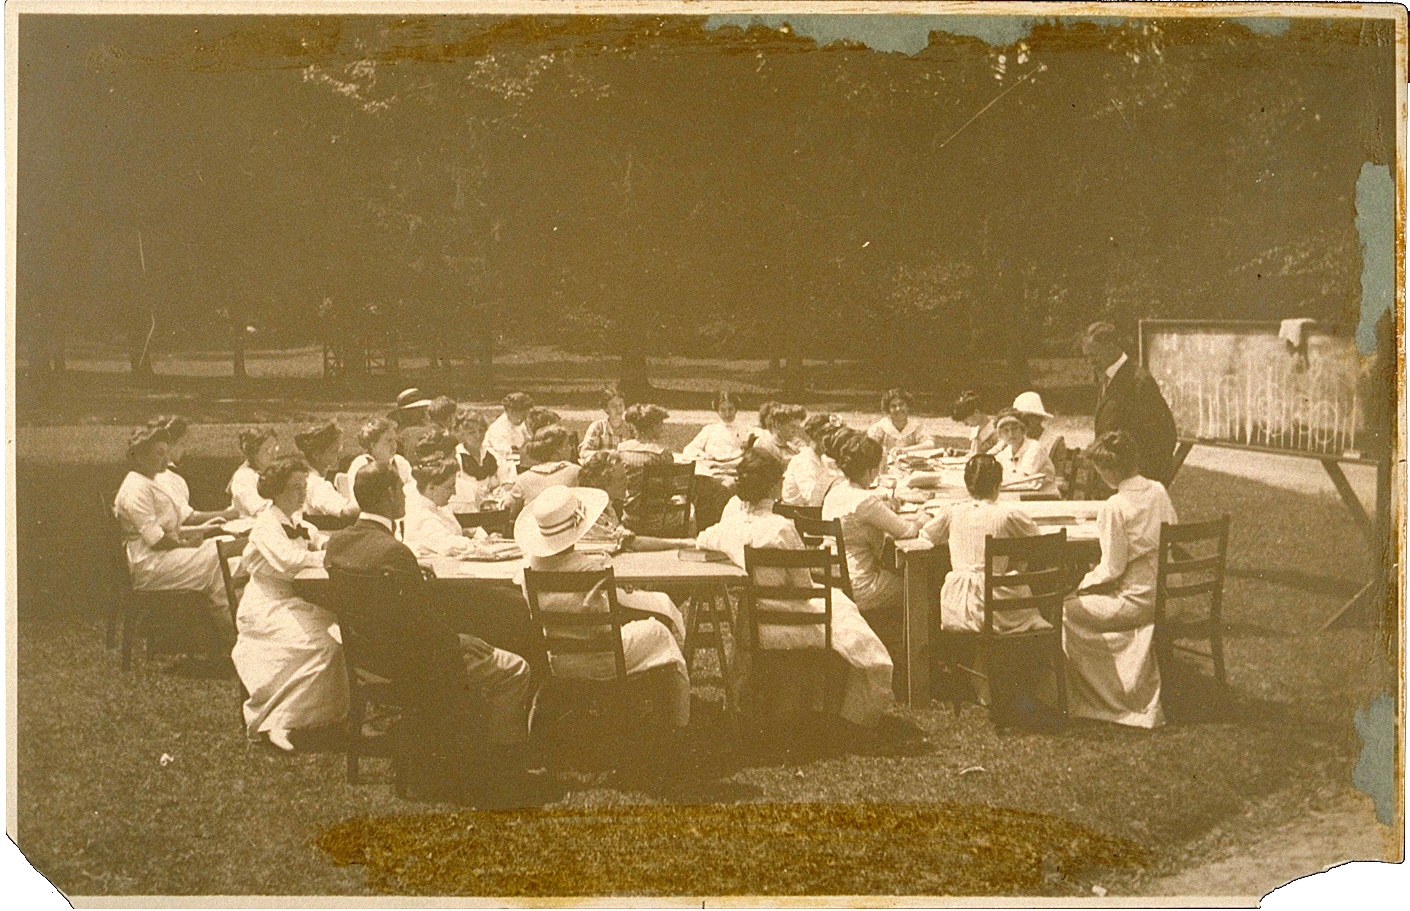 Eugenics Record Office, Field Worker Training Class (Davenport lecturing), circa 1915 at Cold Spring Harbor